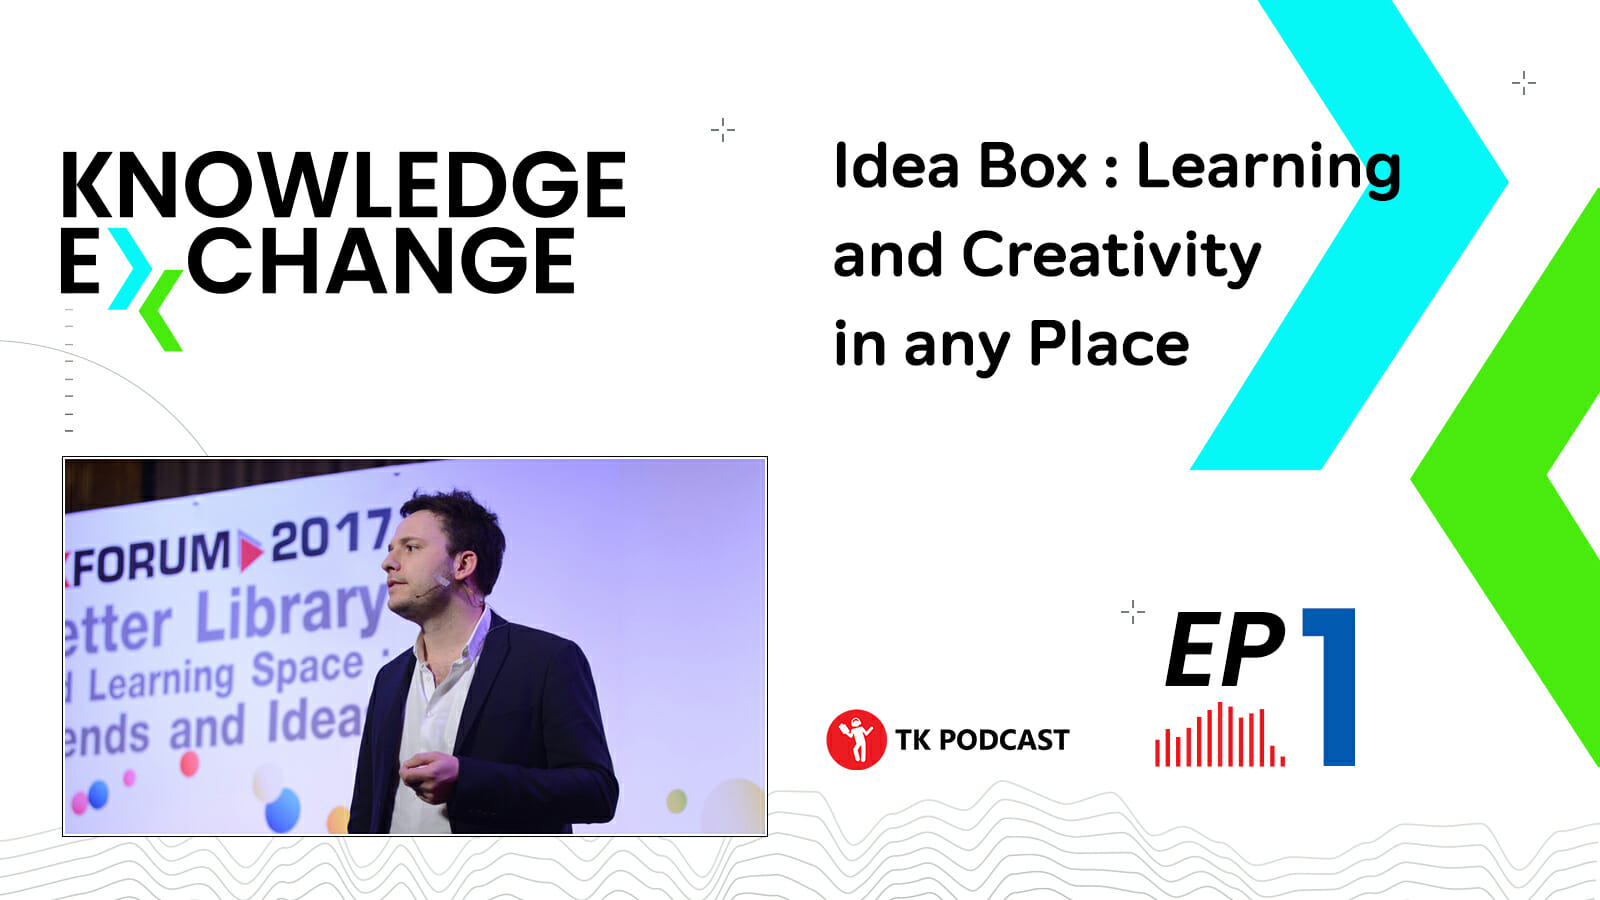 Idea Box : Learning and Creativity in any Place